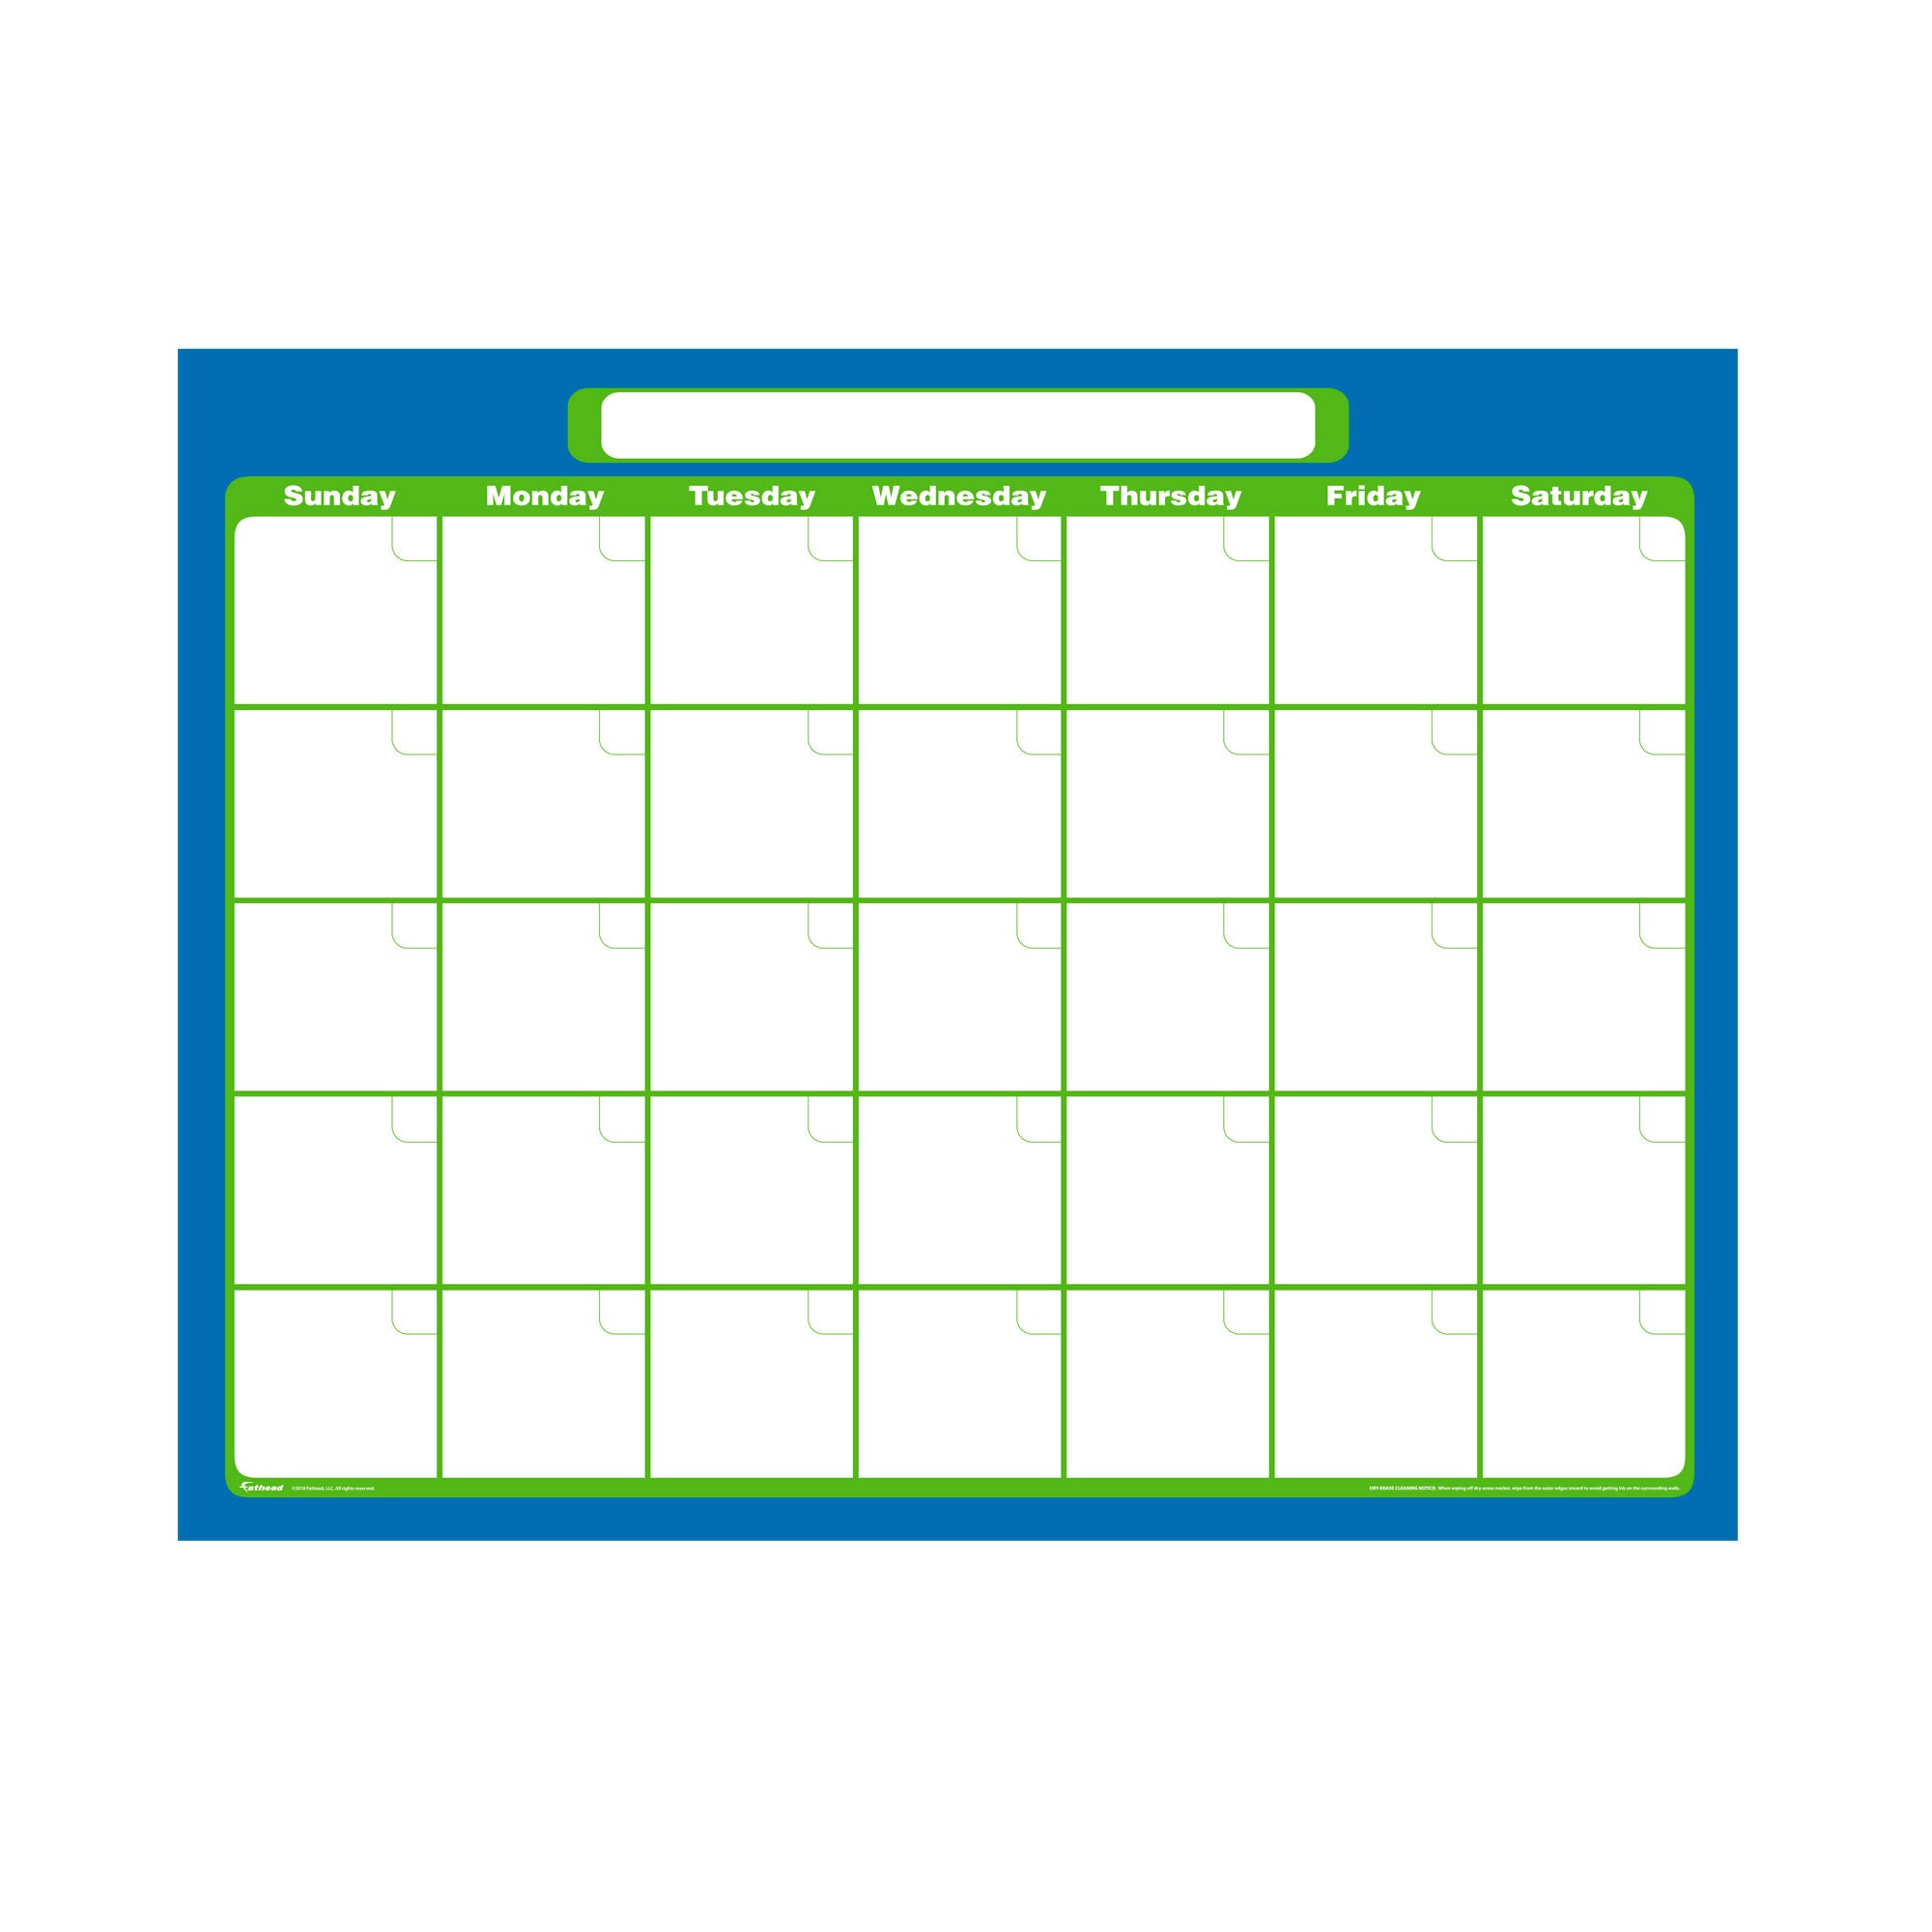 One Month Calendar Dry Erase Removable Wall Adhesive Decal in Navy/Royal Blue 27"W x 39.5"H by Fathead | Vinyl